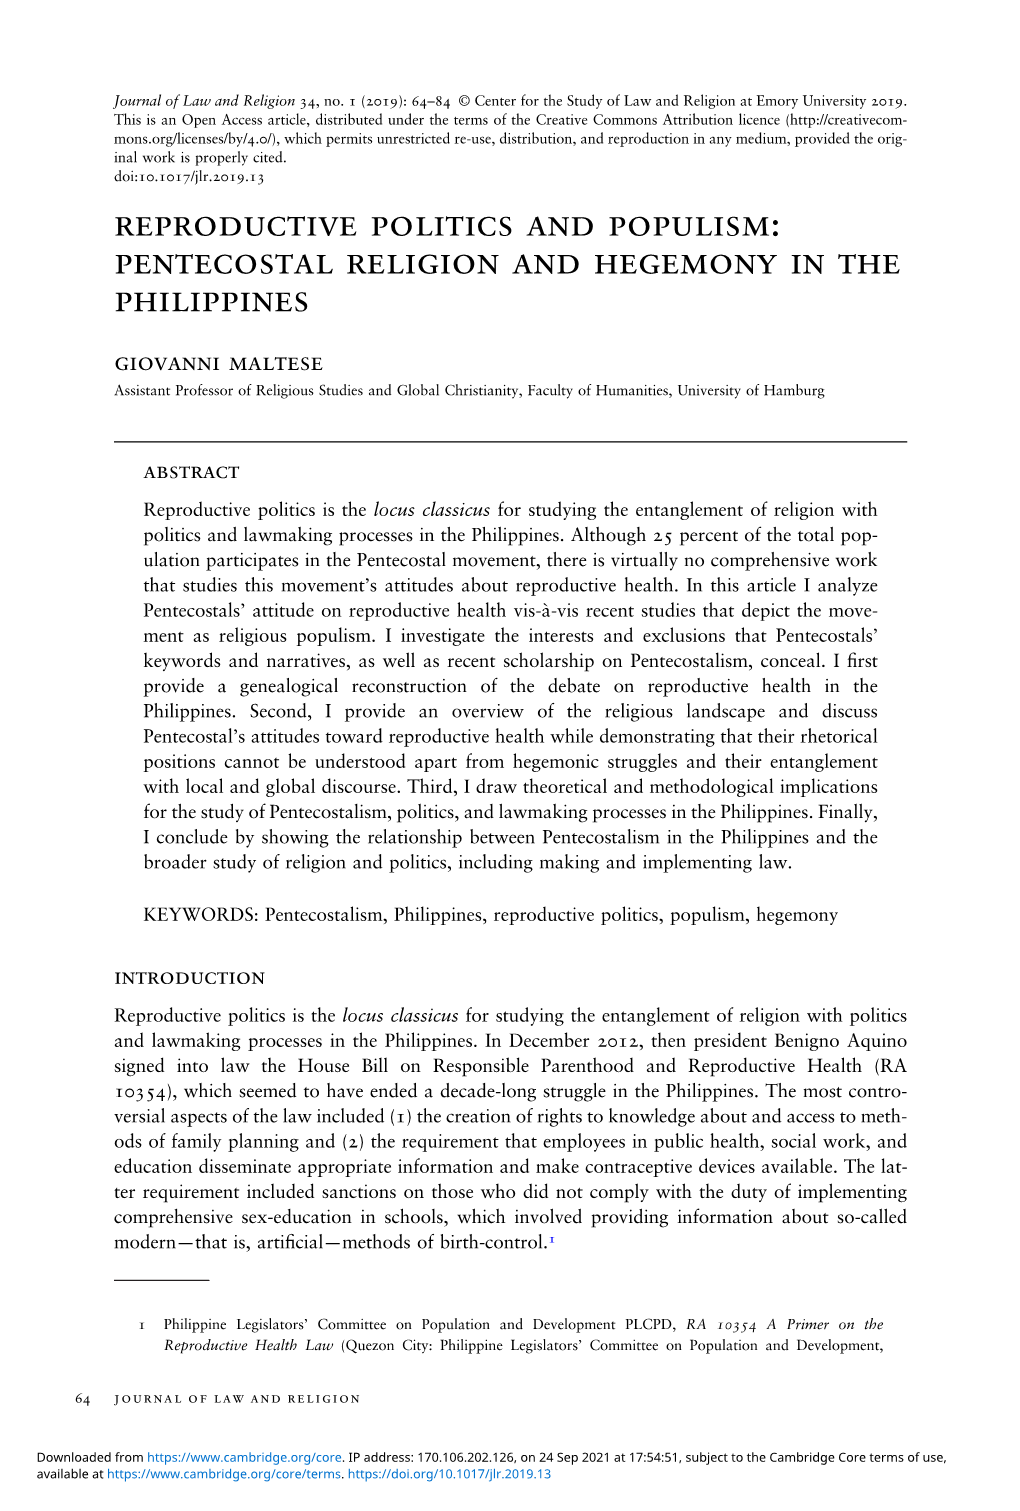 Reproductive Politics and Populism: Pentecostal Religion and Hegemony in the Philippines